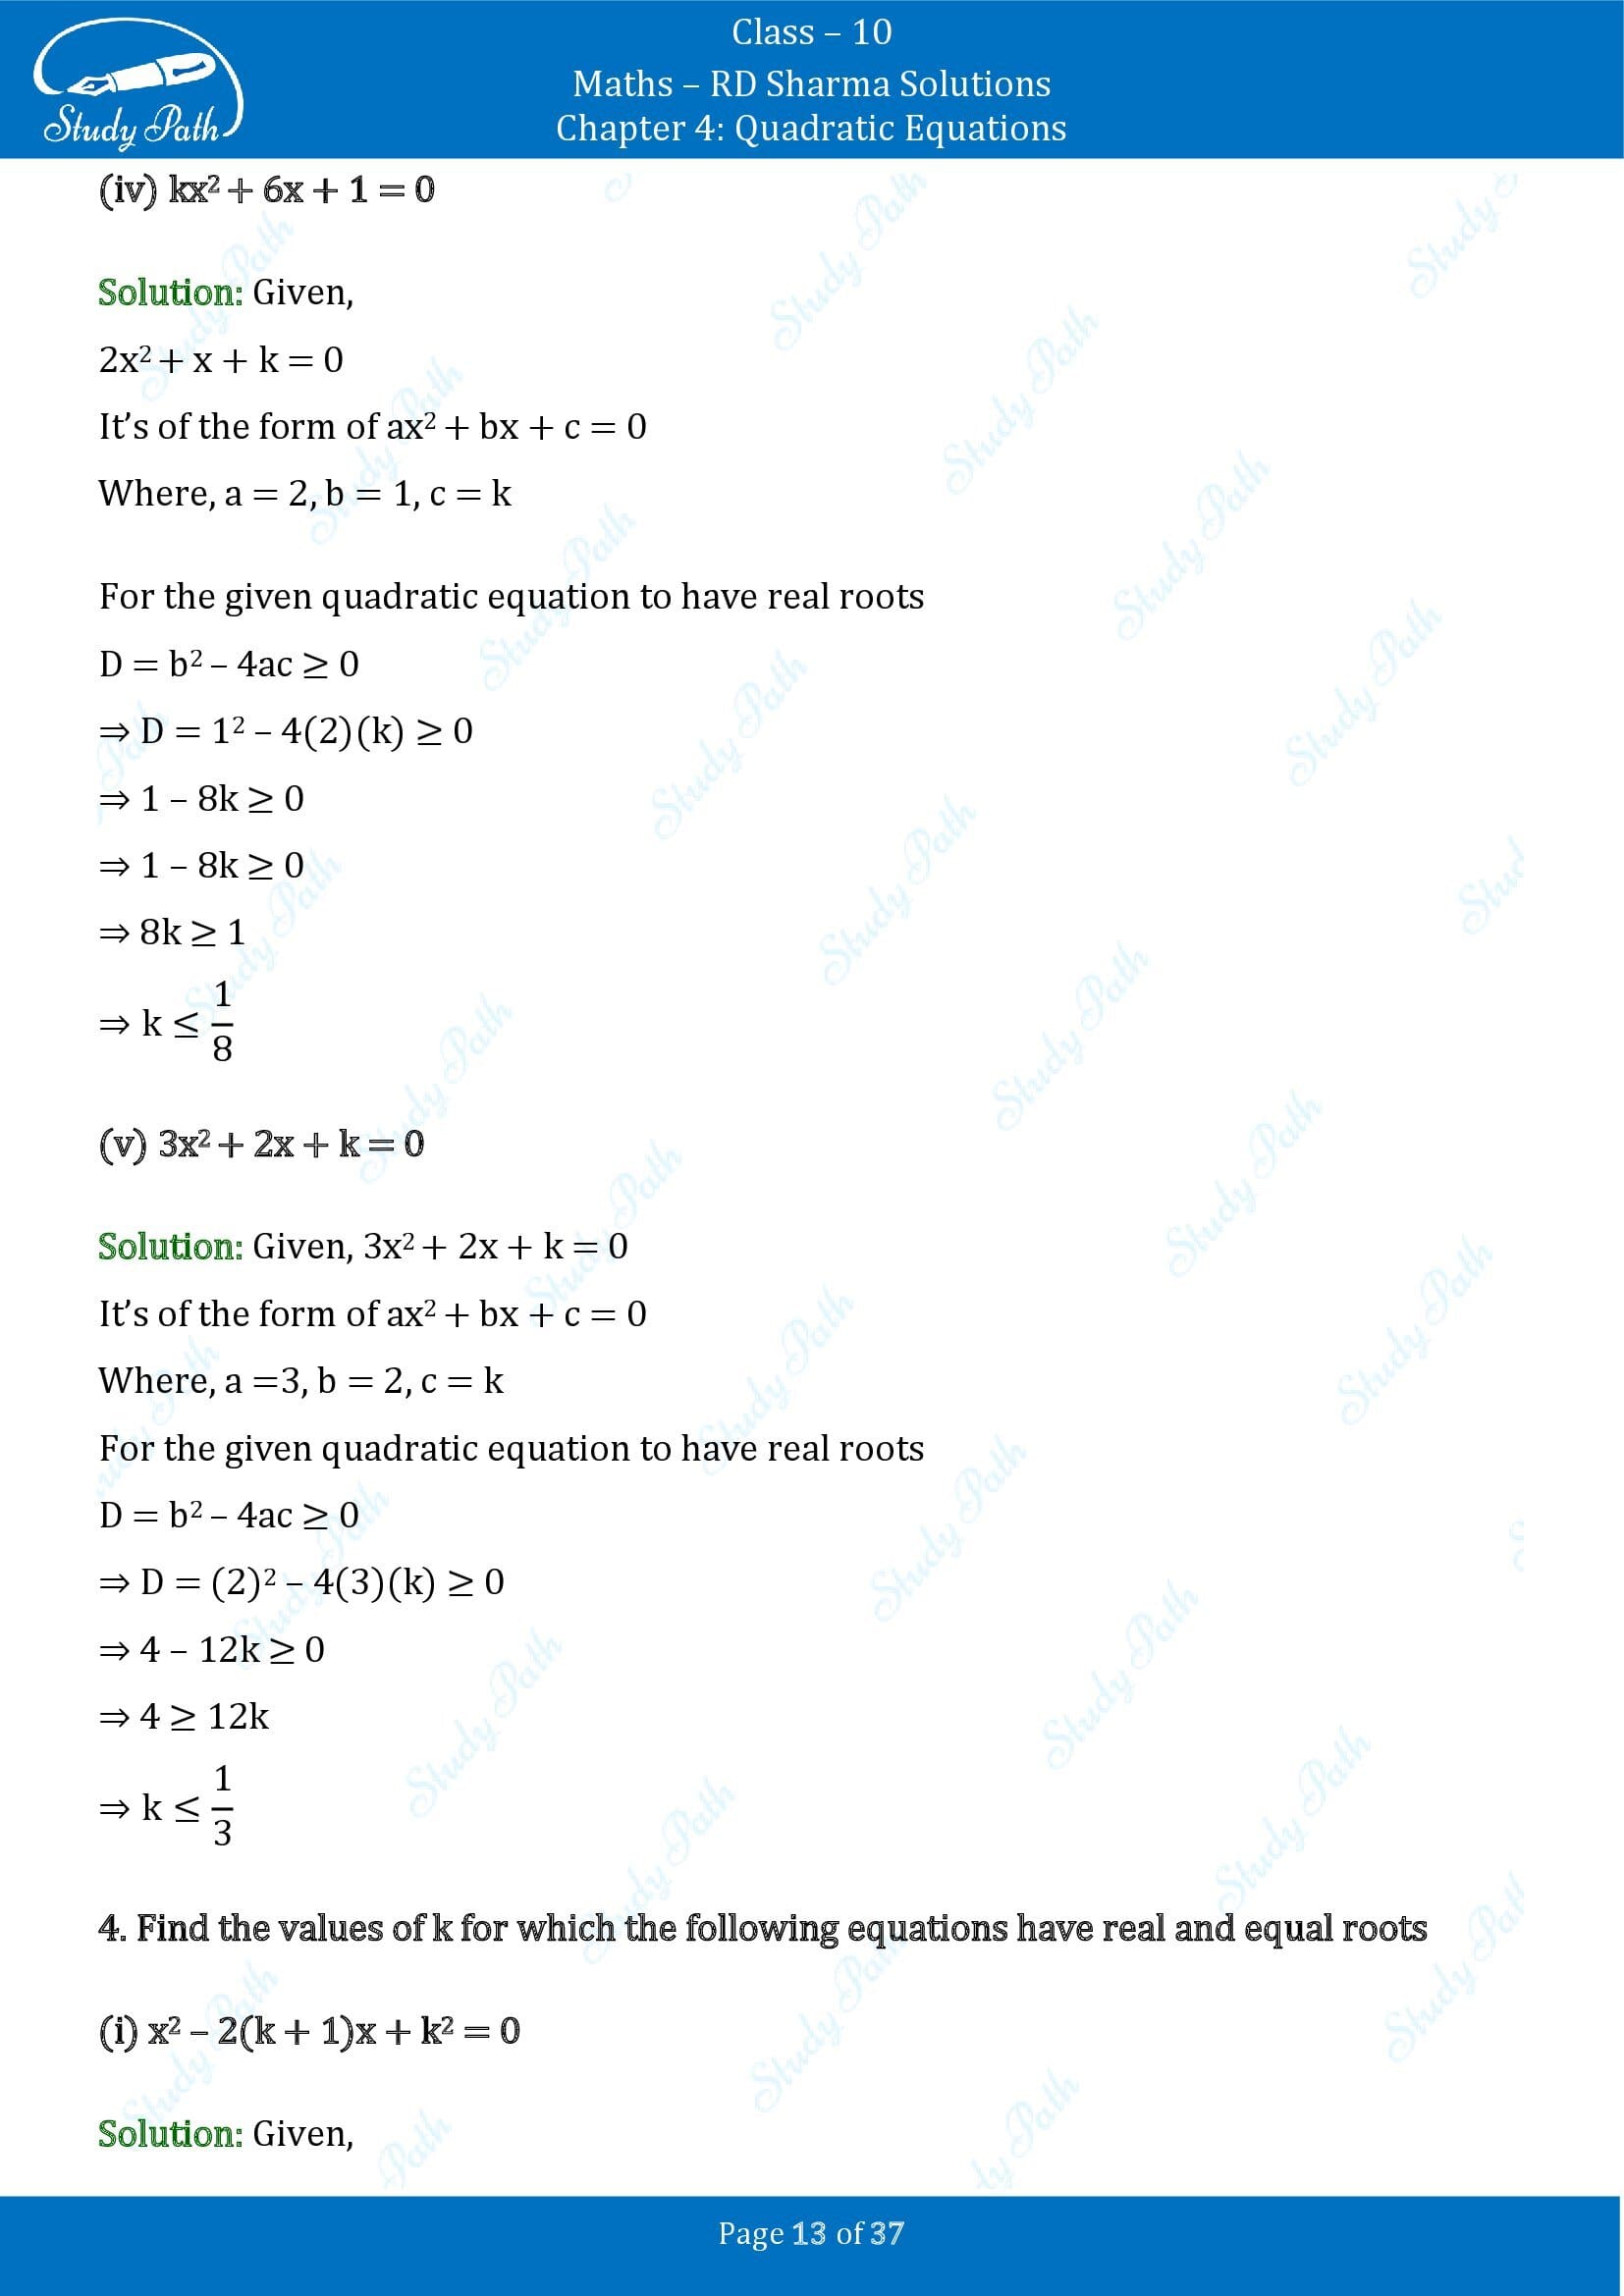 RD Sharma Solutions Class 10 Chapter 4 Quadratic Equations Exercise 4.6 00013